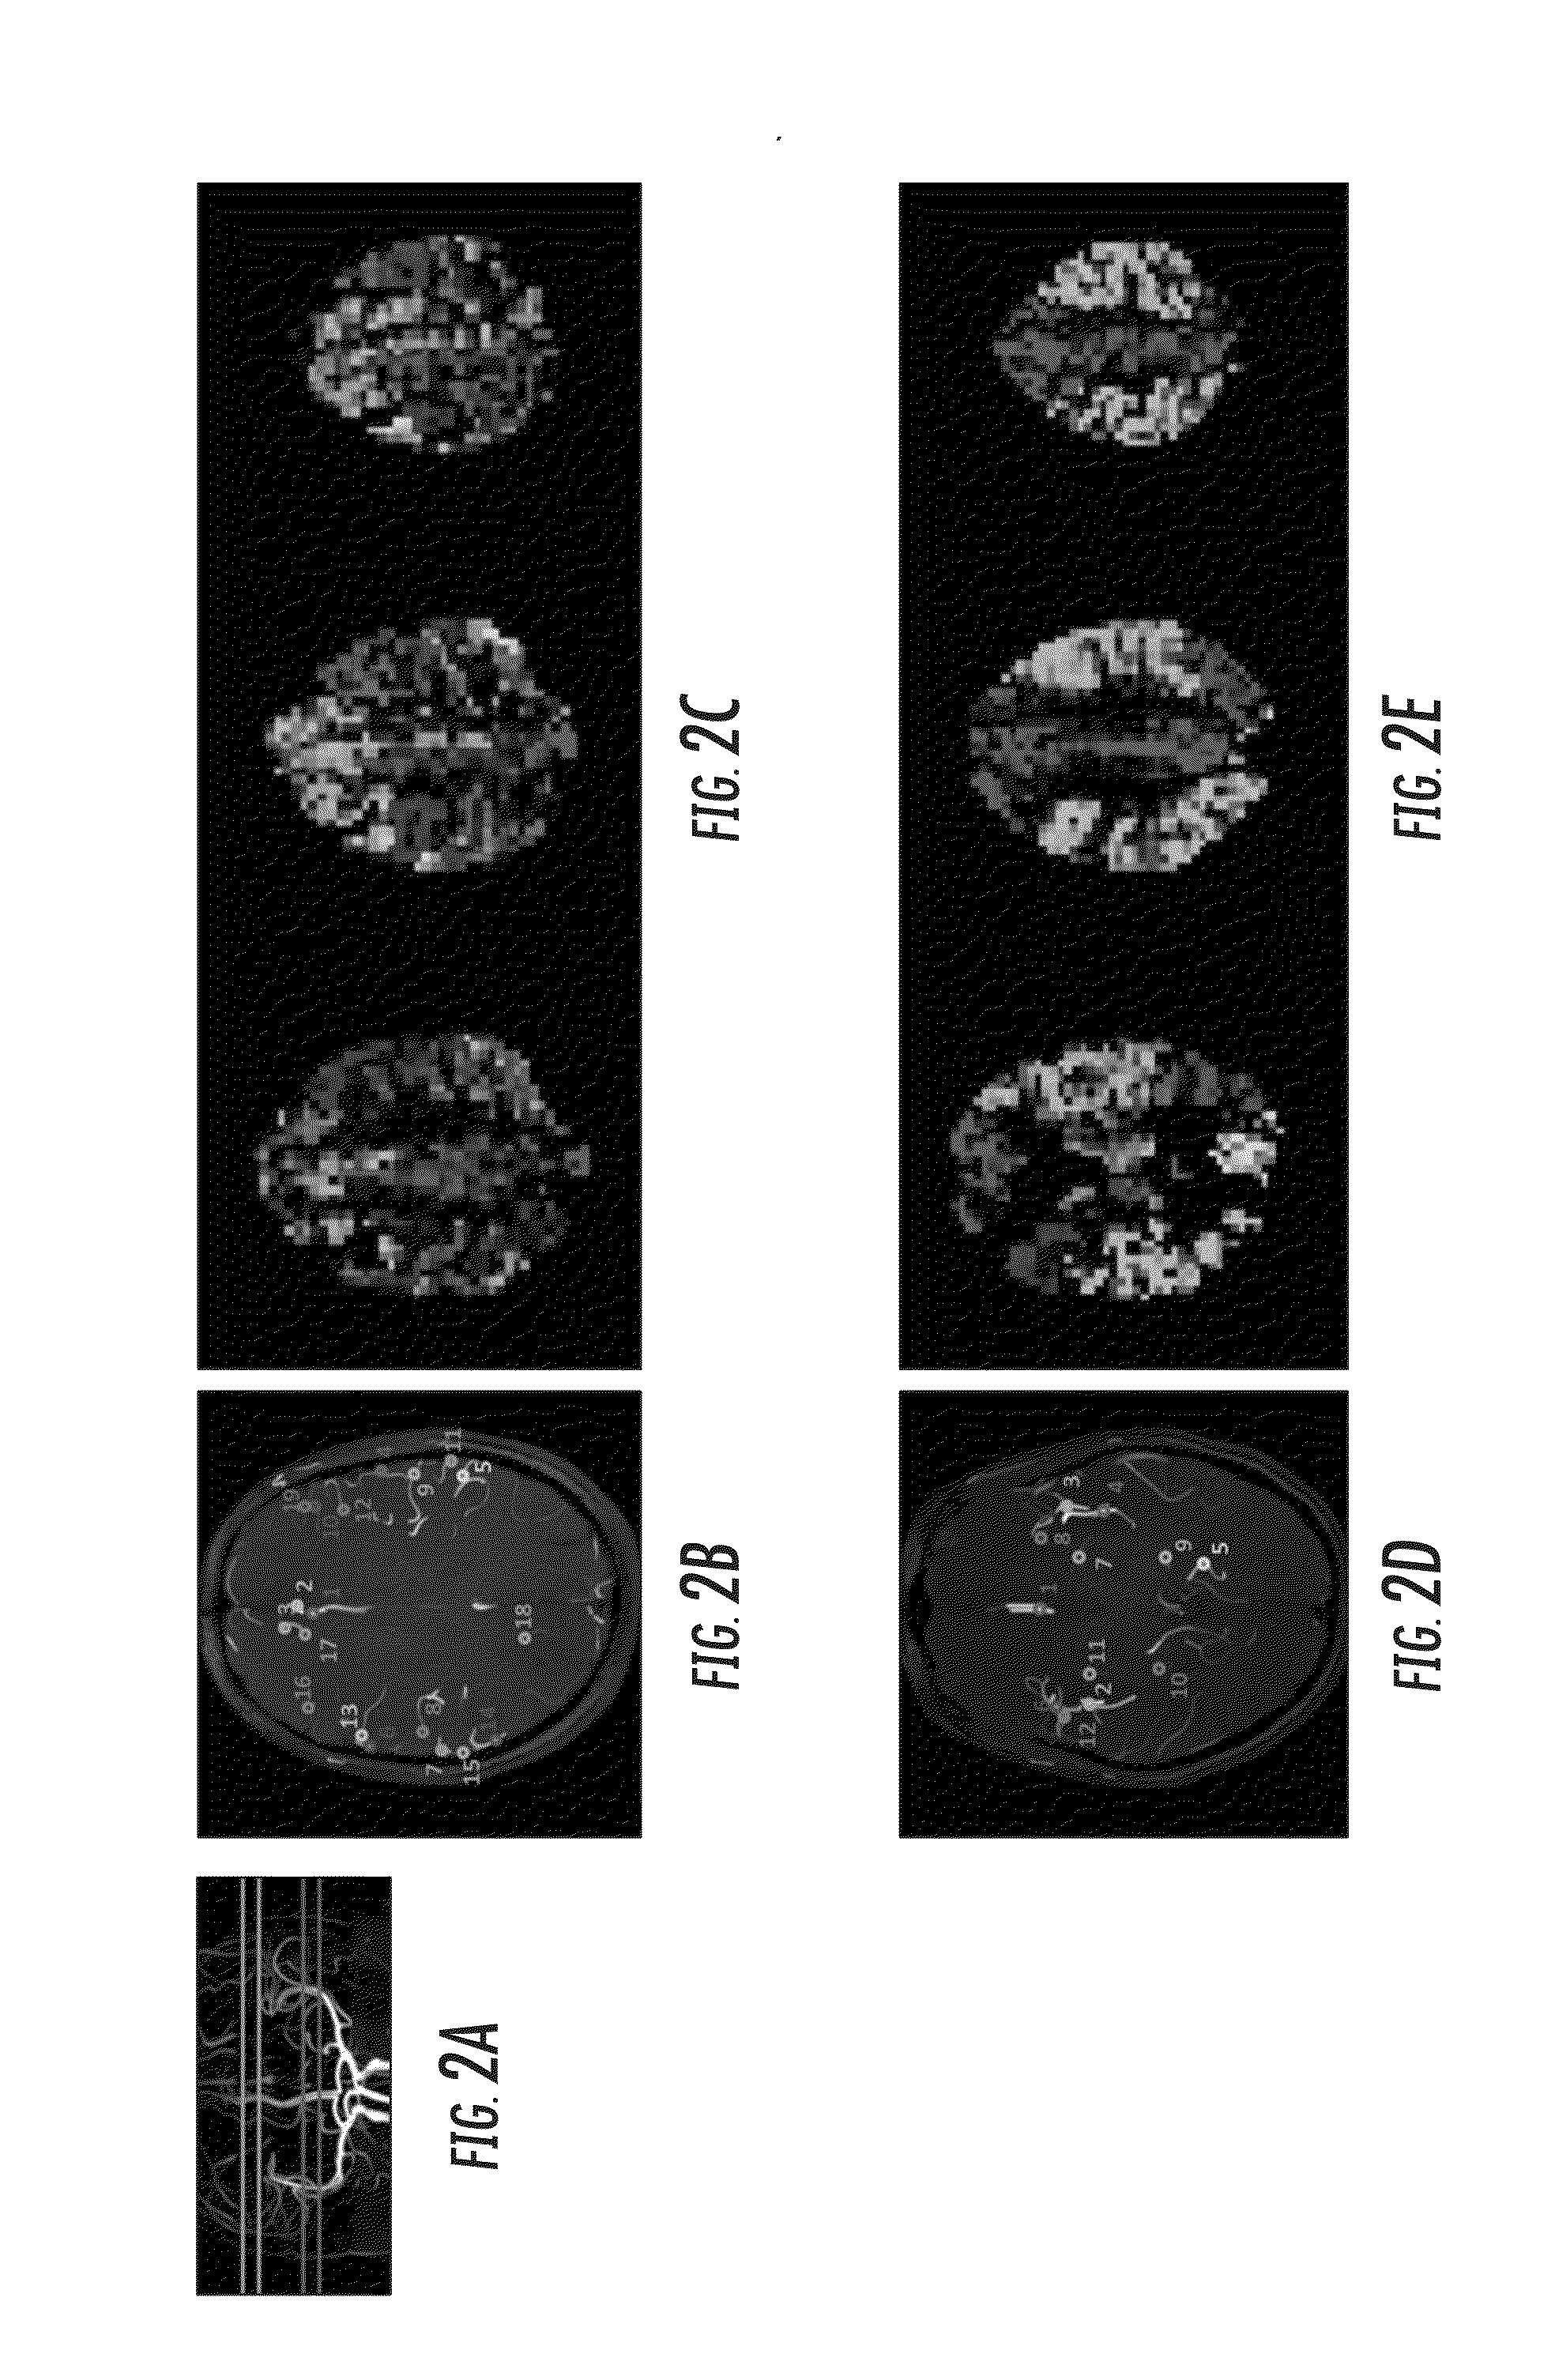 Vascular territory segmentation using mutual clustering information from image space and label space